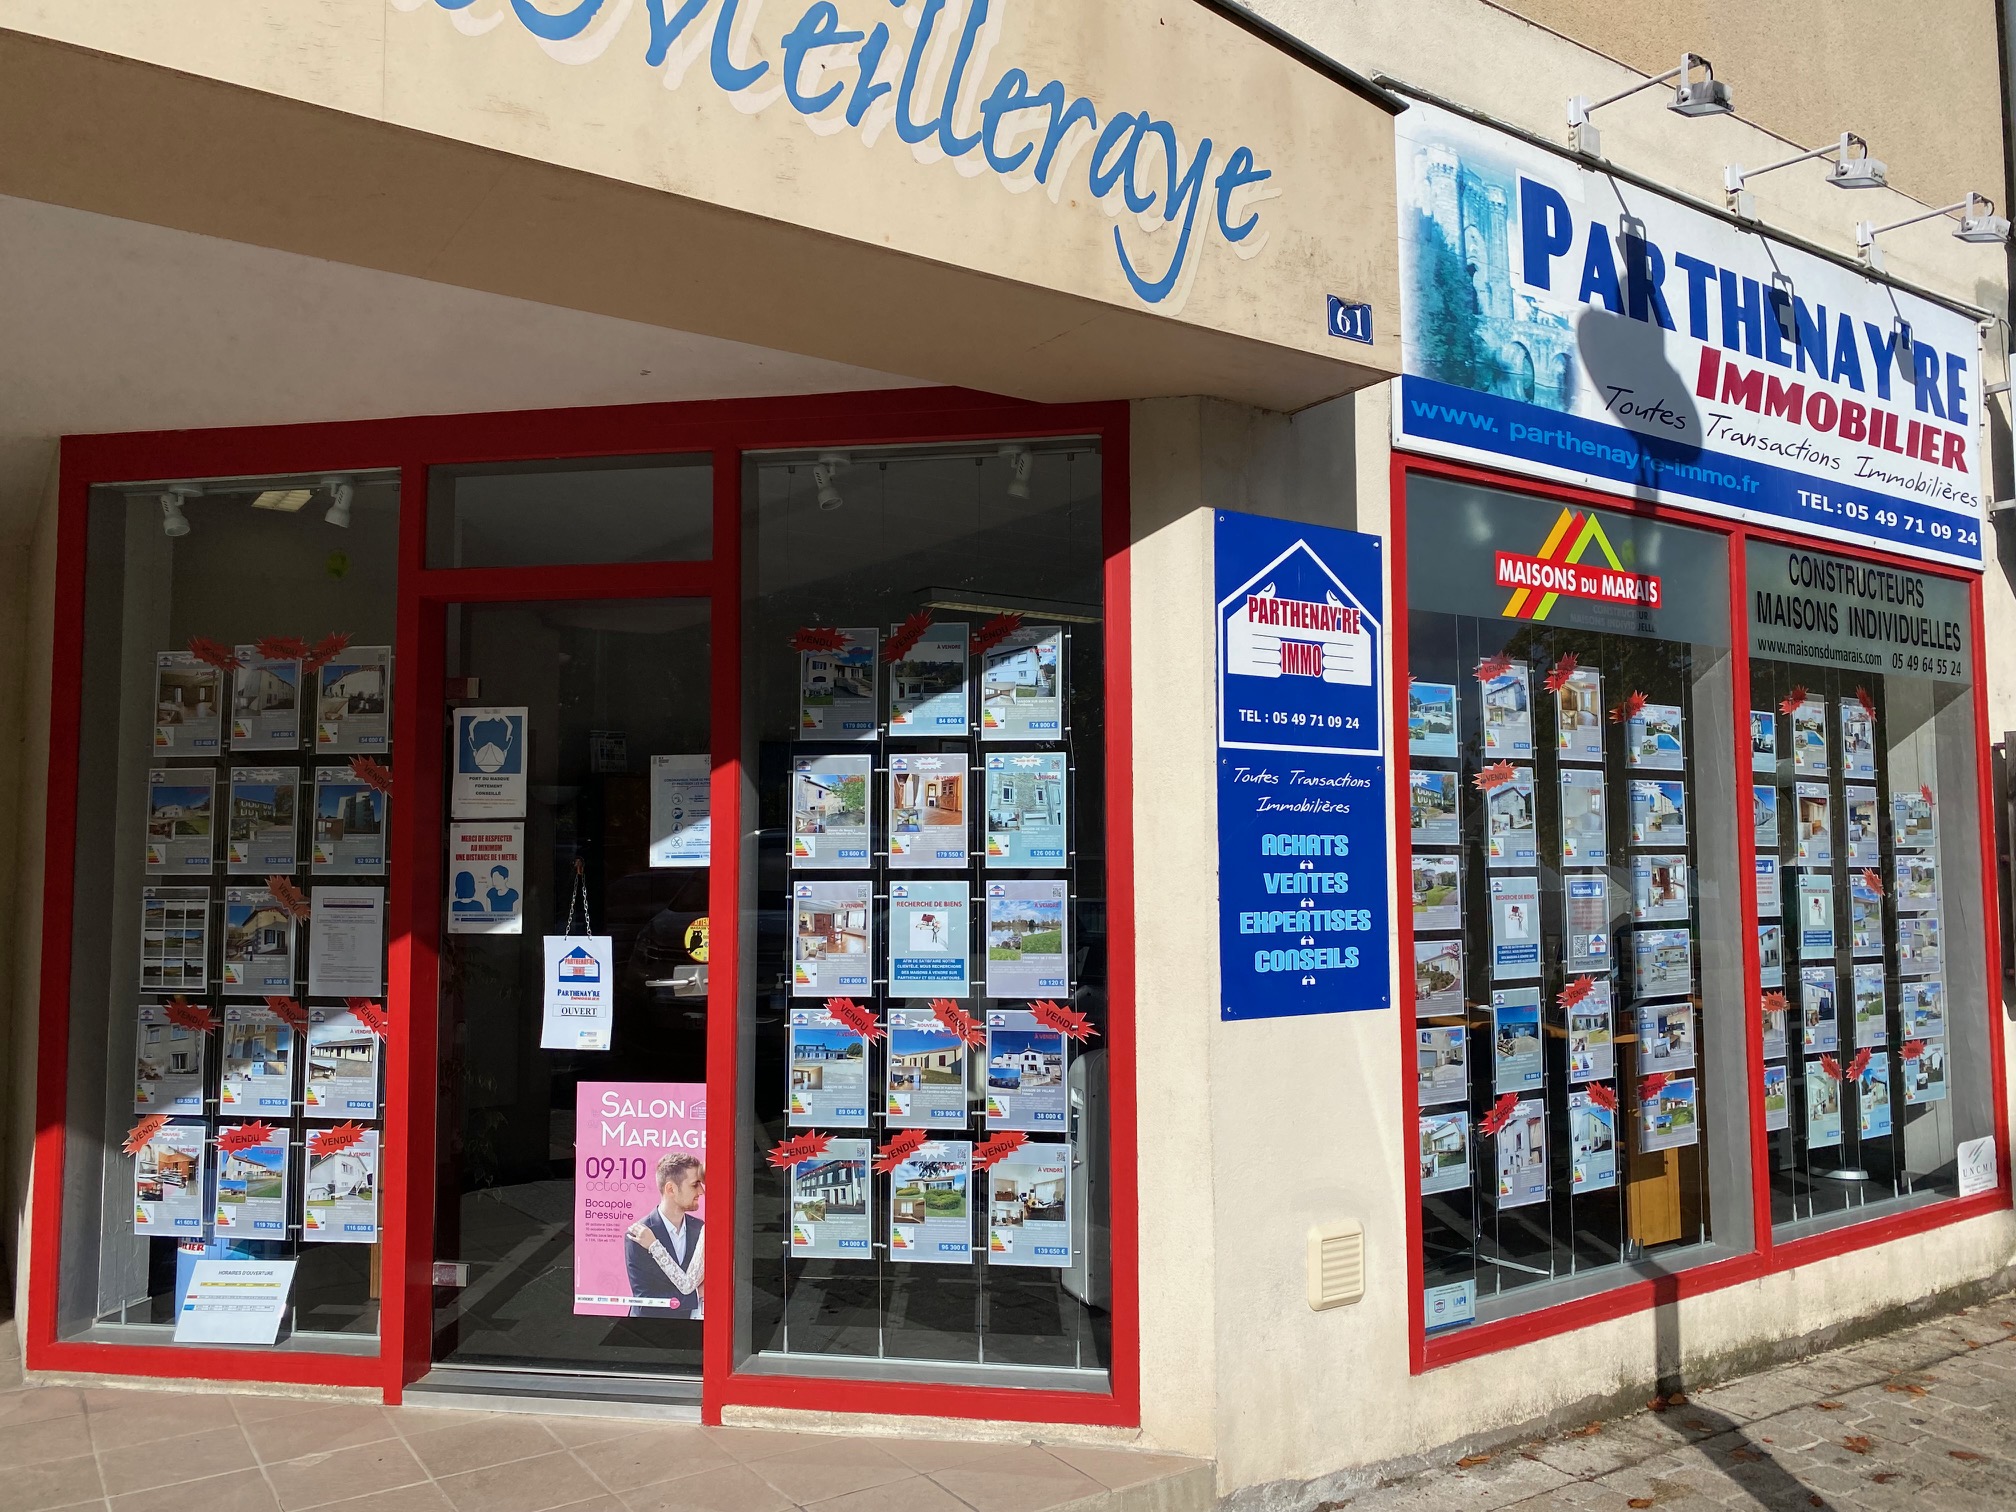 Agence Parthenay're immobilier